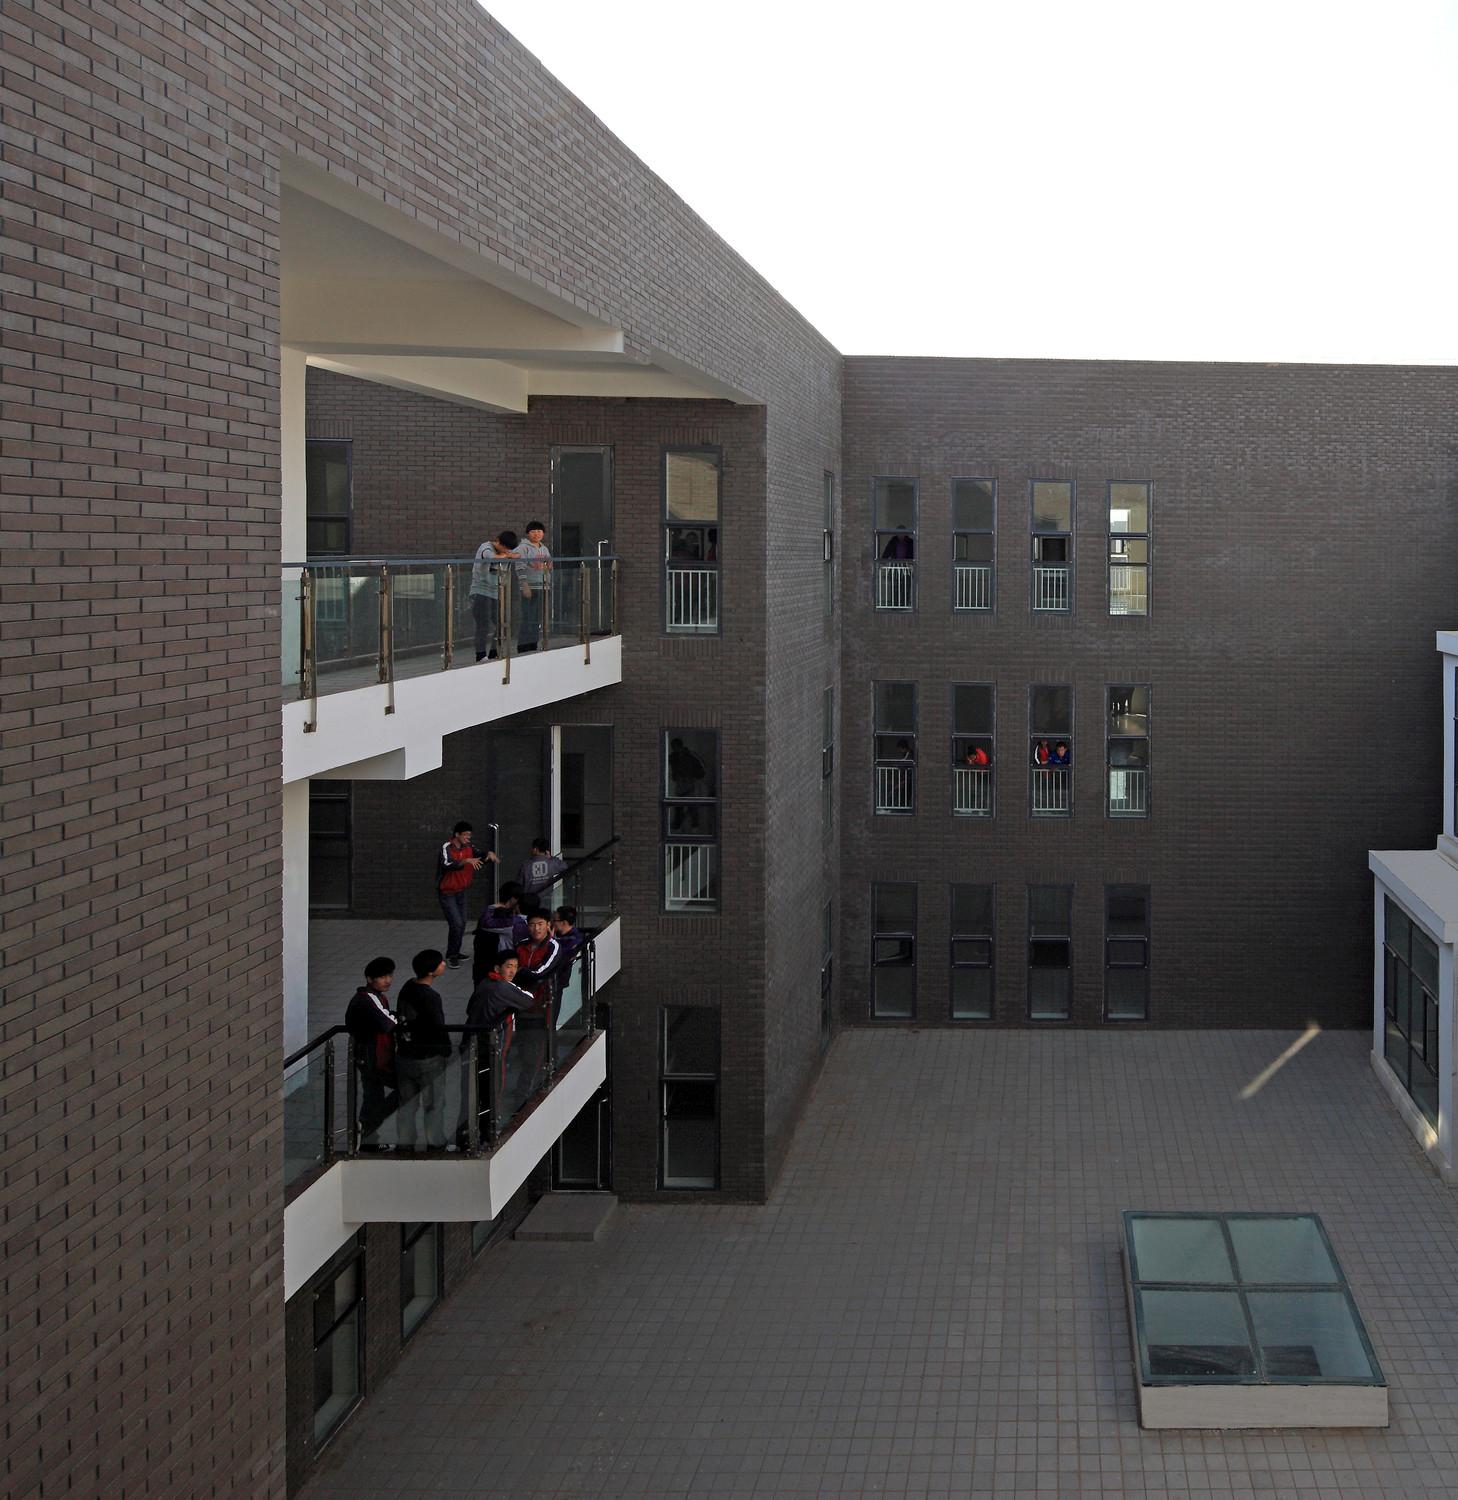 The inner courtyard of one teaching building